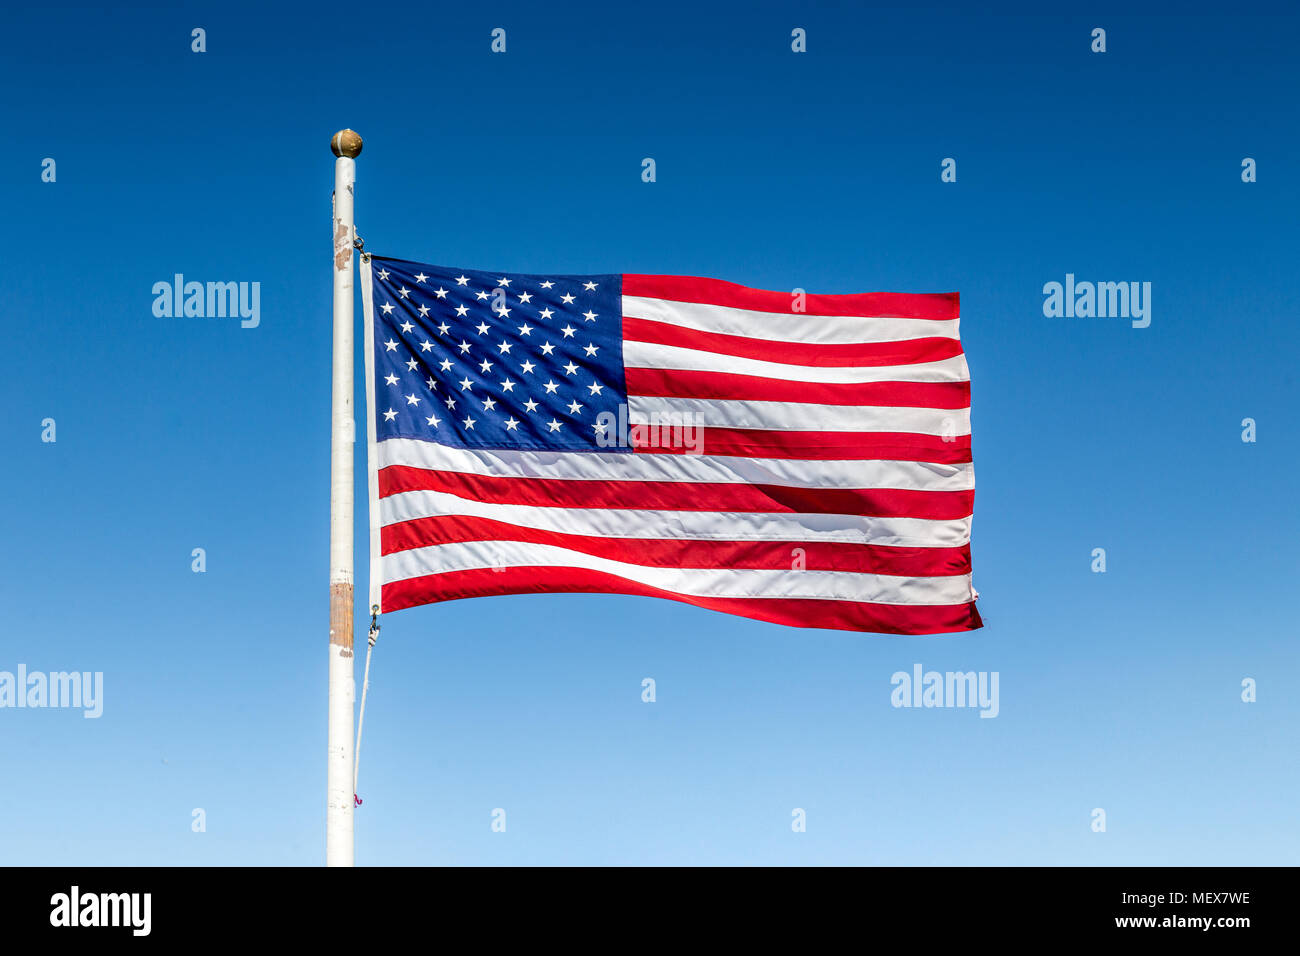 Classic view of USA flag waving in the wind against blue sky on a beautiful sunny day in summer, United States of America, North America Stock Photo